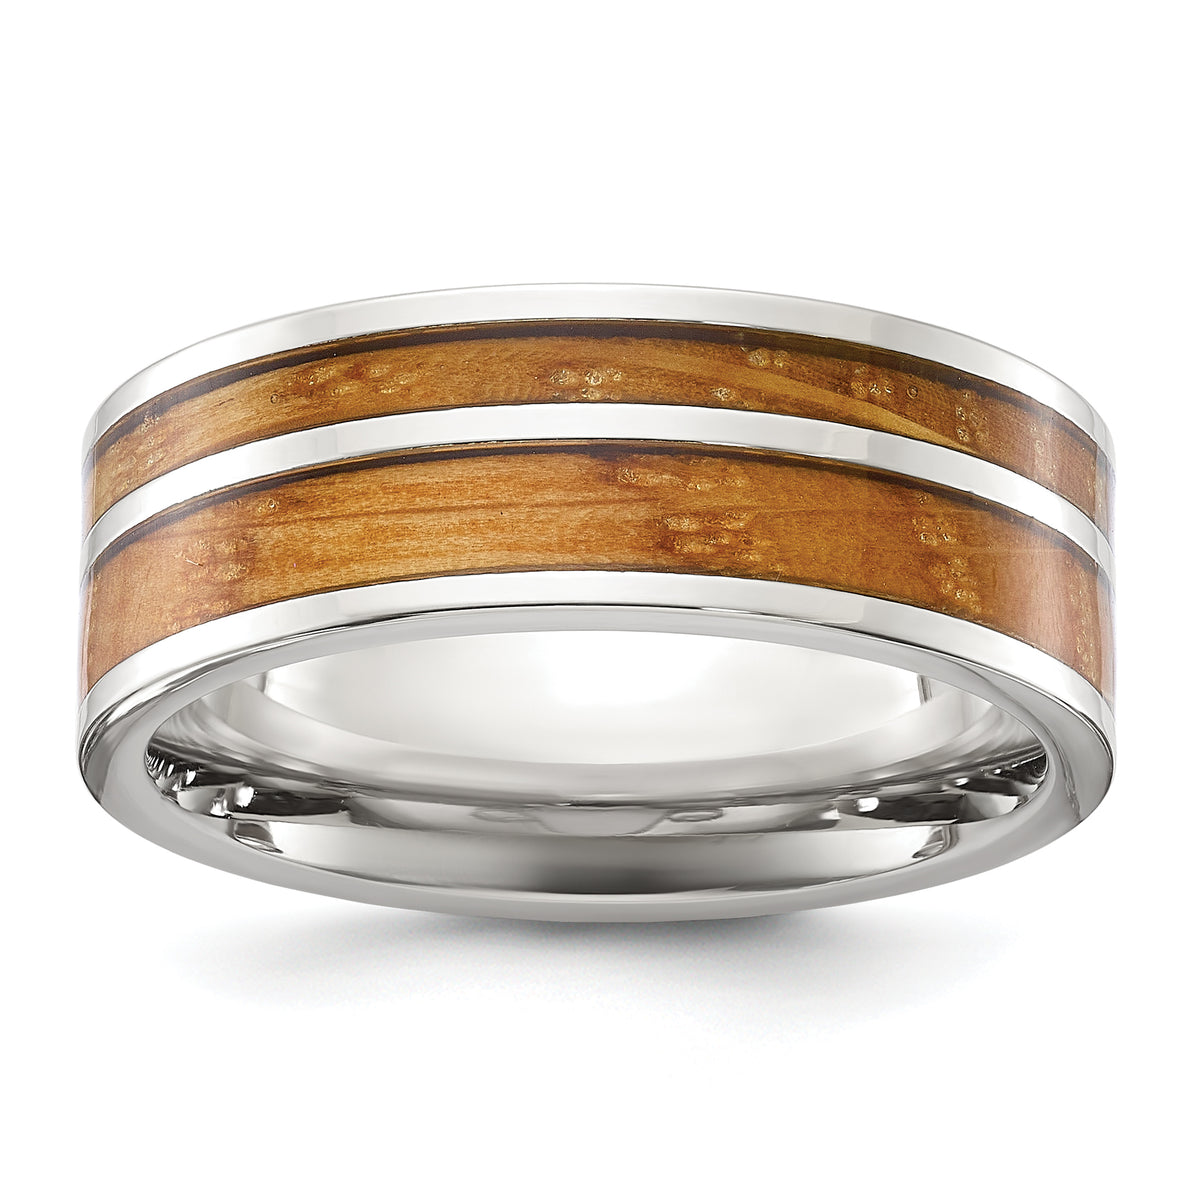 Stainless Steel Polished with Wood Inlay 8mm Band